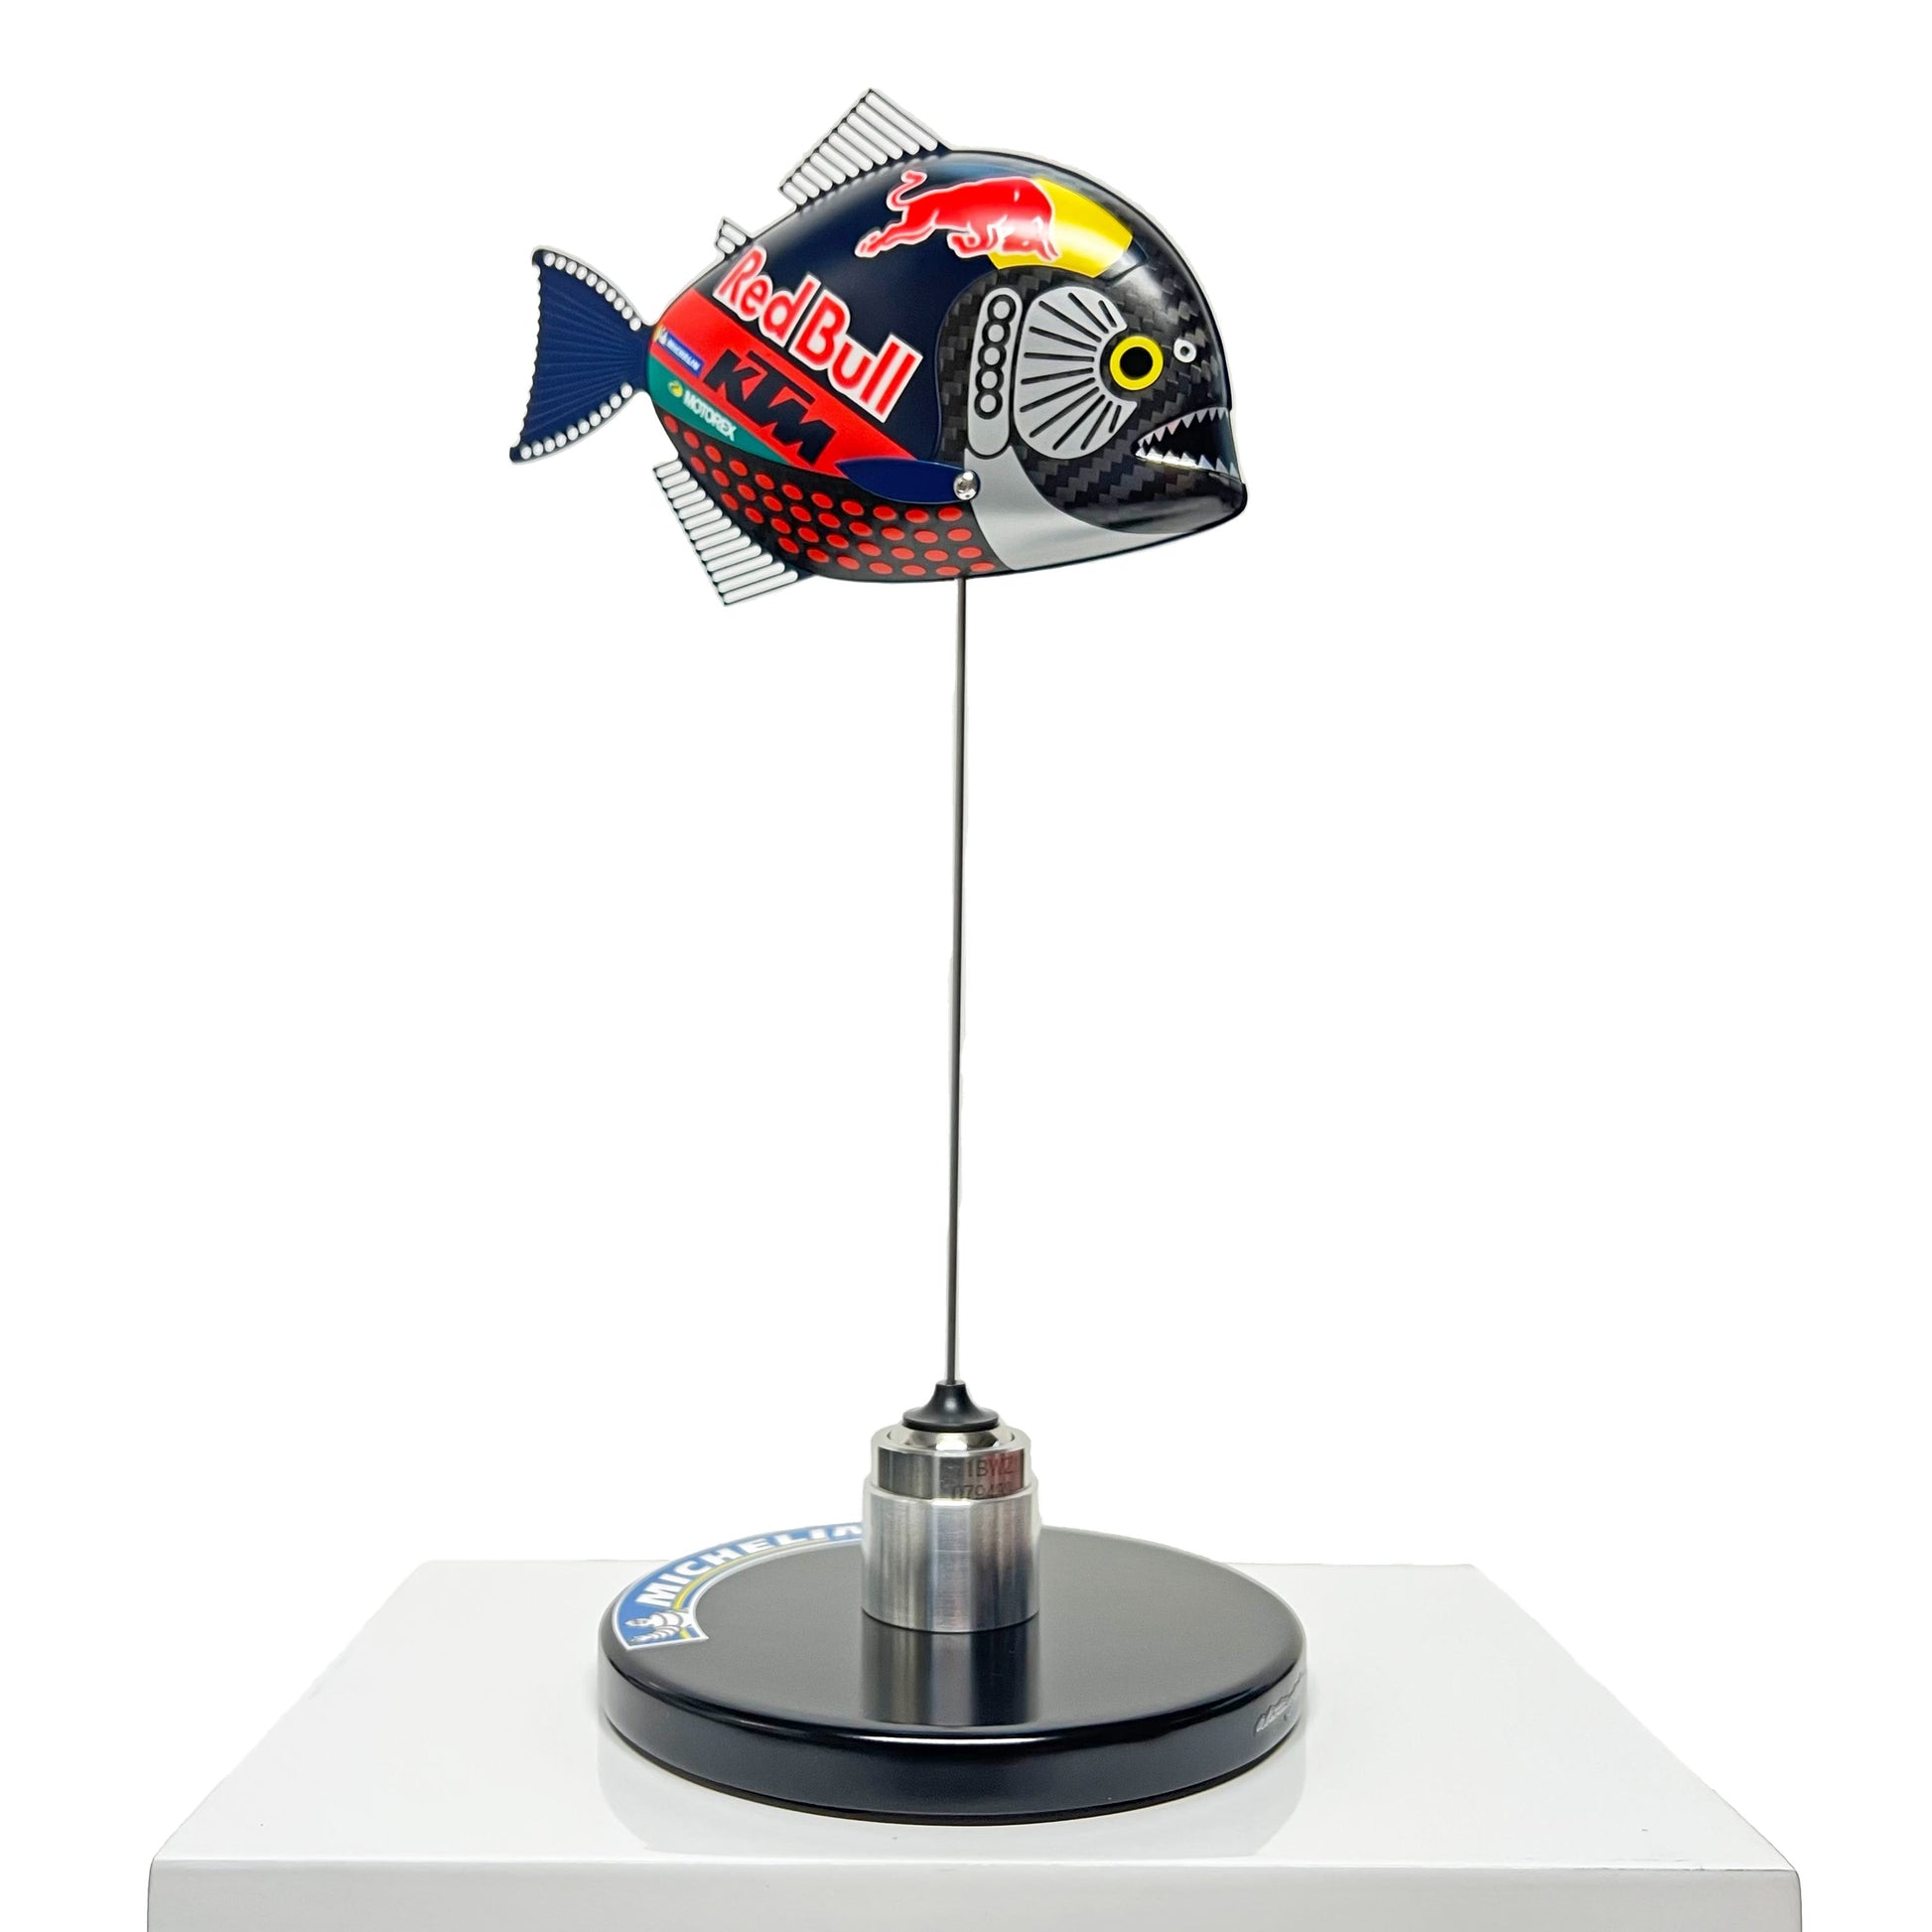 Carbon fibre Piranha sculpture with KTM Redbull livery on a black base with F1 part